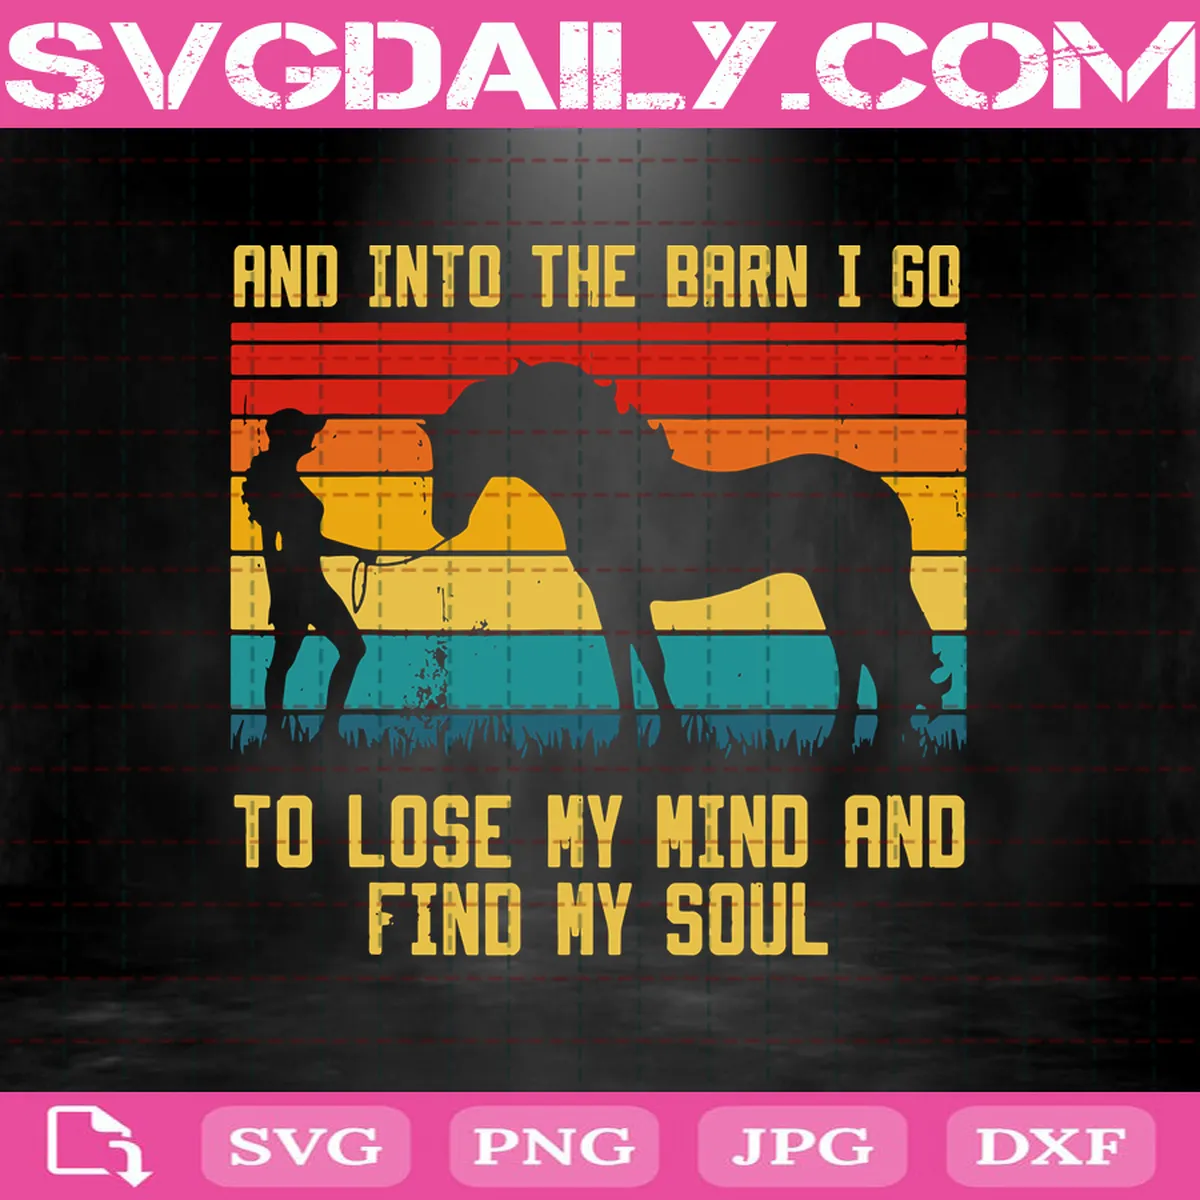 And Into The Barn I Go To Lose My Mind And Find My Soul Svg, Horse Barn Svg, Horse Svg, Hosre Lover Svg, Lose My Mind Svg, Horse Rider Svg